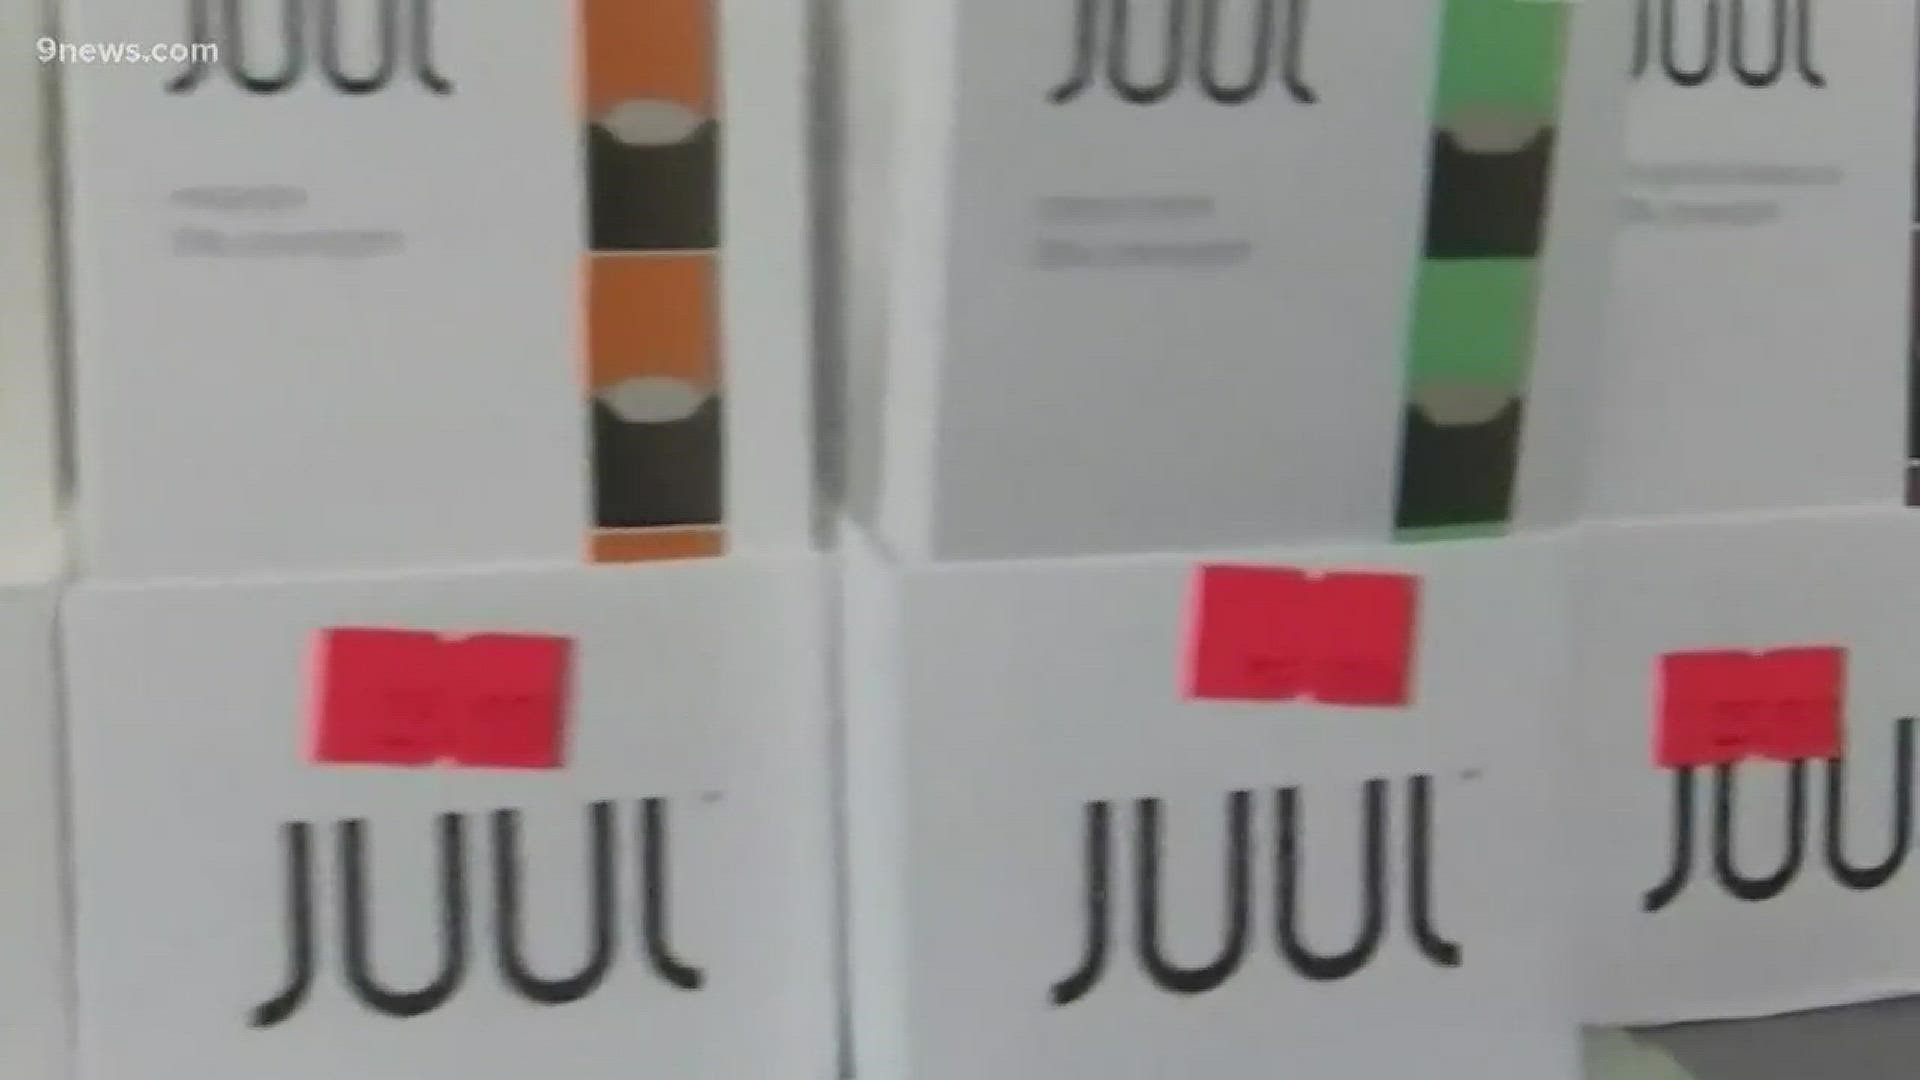 America's top e-cigarette maker is going to stop selling flavored 'pods' for their Juuls - but even ahead of that Colorado Quitline can now be used by kids as young as 12. E-cigs are to blame.